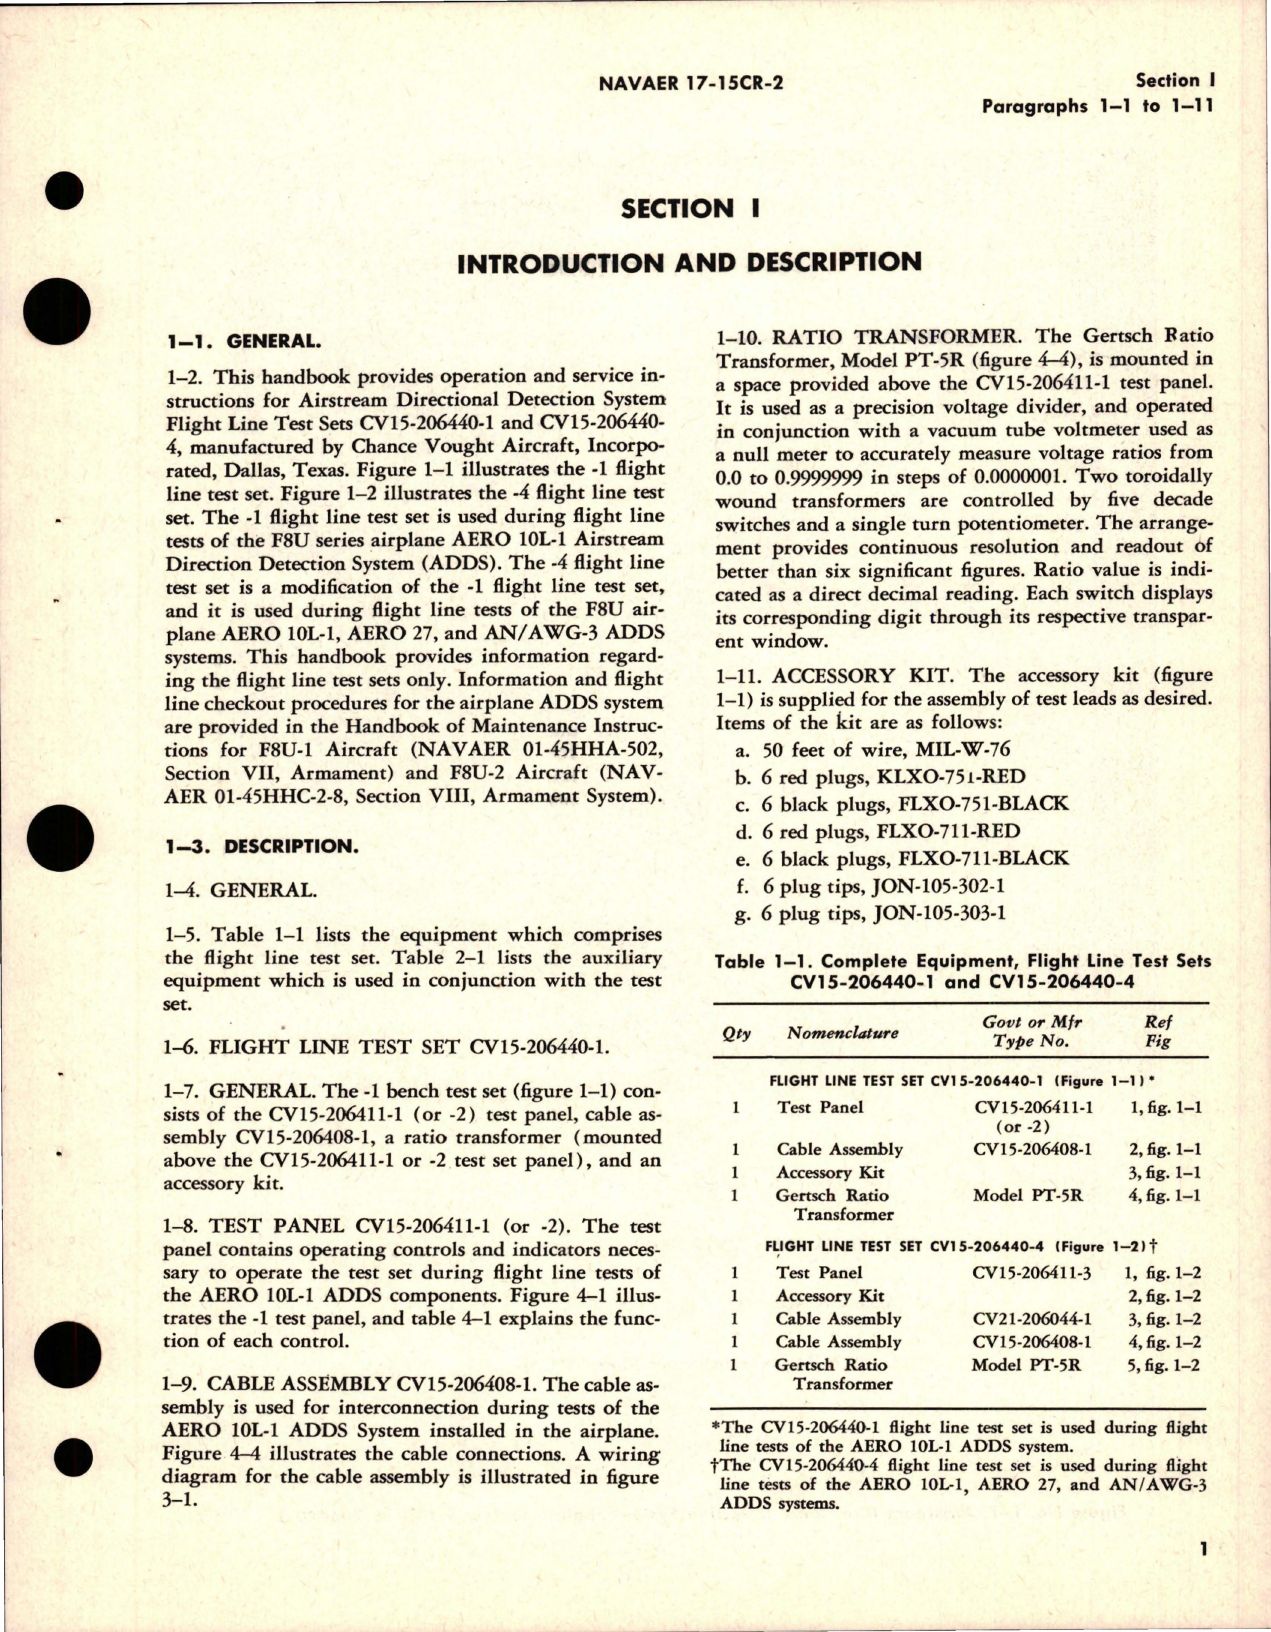 Sample page 5 from AirCorps Library document: Operation and Service Instructions with Illustrated Parts for Airstream Directional Detection System Flight Line Test Sets - CV15-206440-1, CV15-206440-4